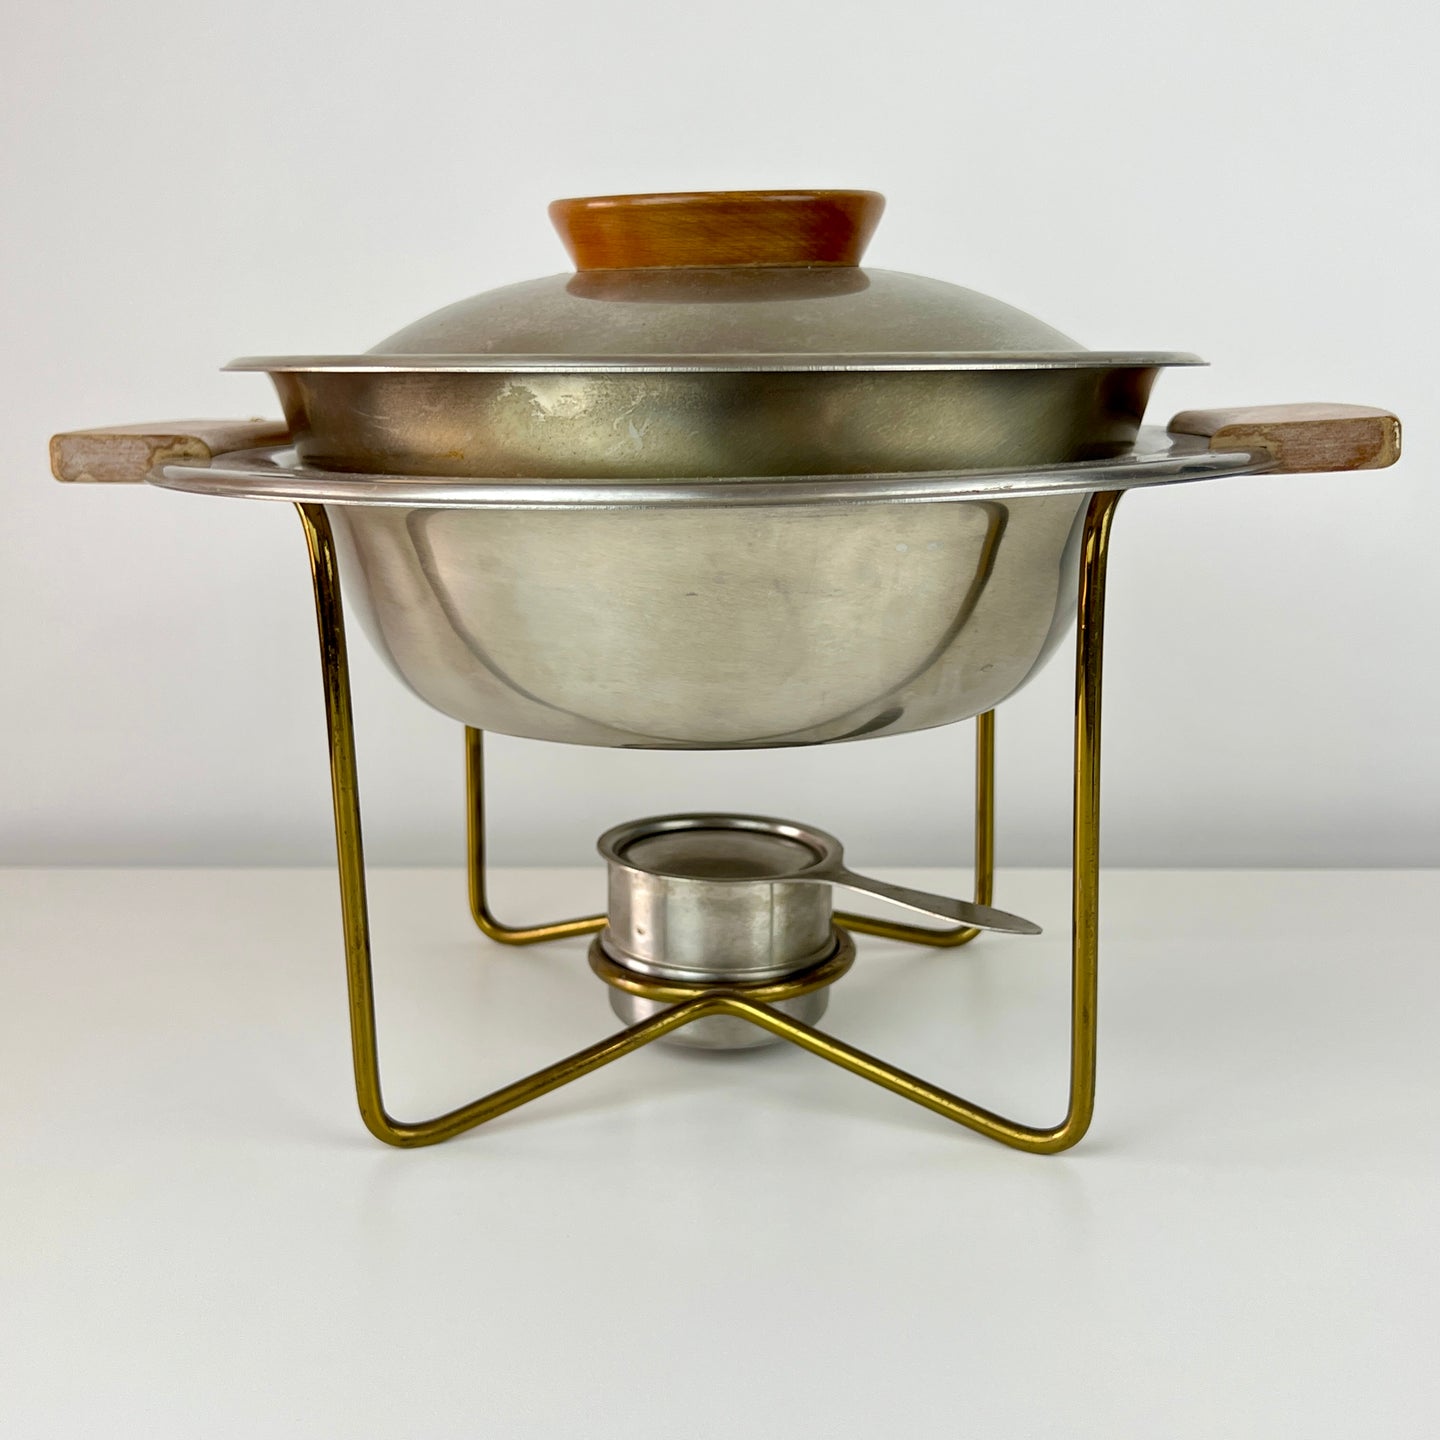 International Stainless Steel Wood-Handled Chafing Dish